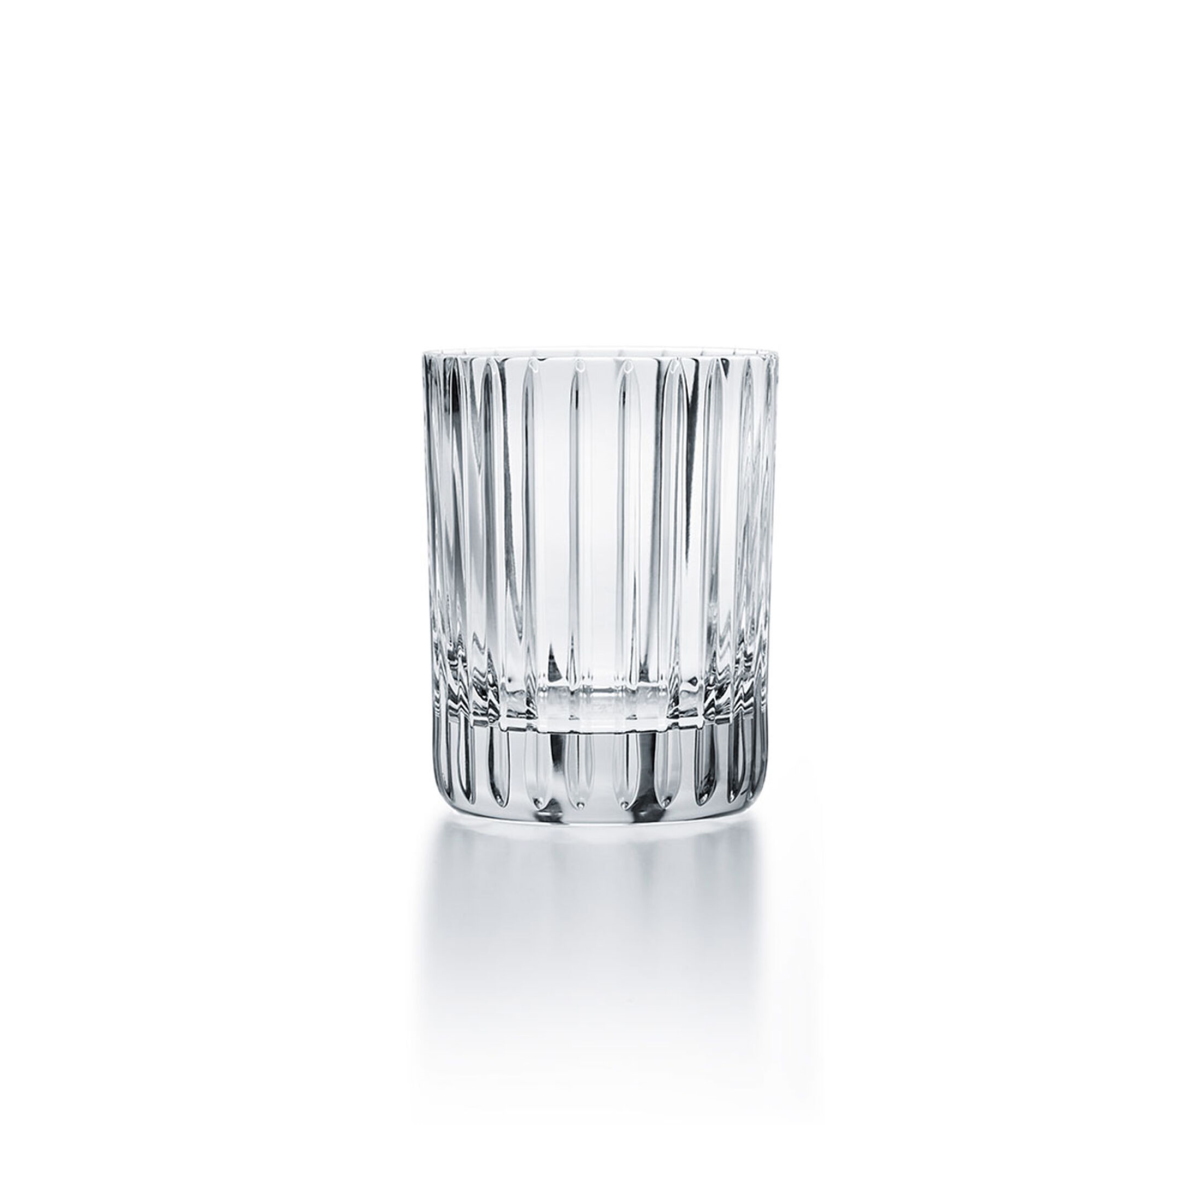 Shop Our Full Collection of Baccarat Products at Berings